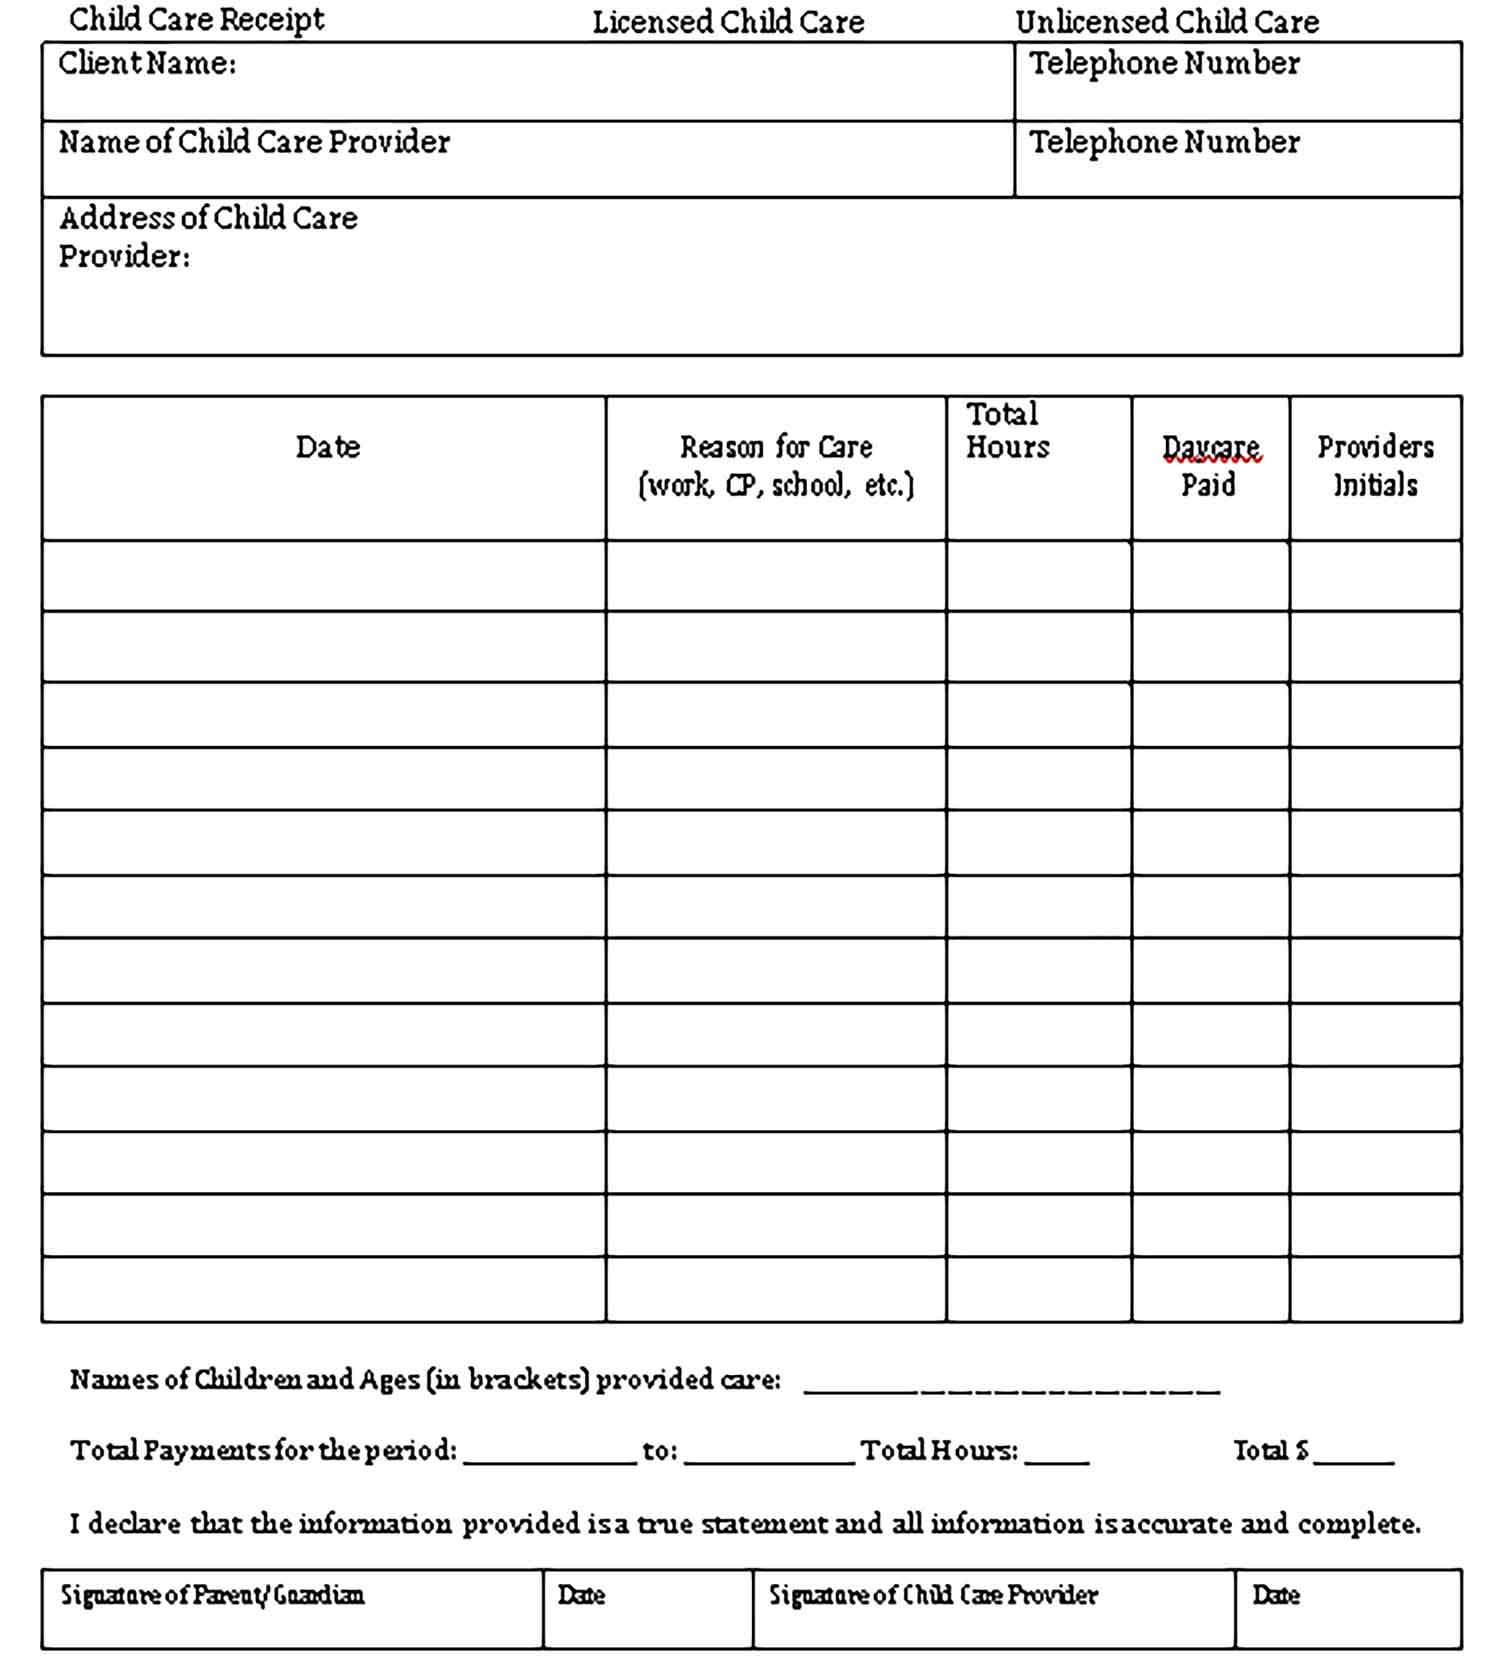 Sample Day Care Services Receipt Templates